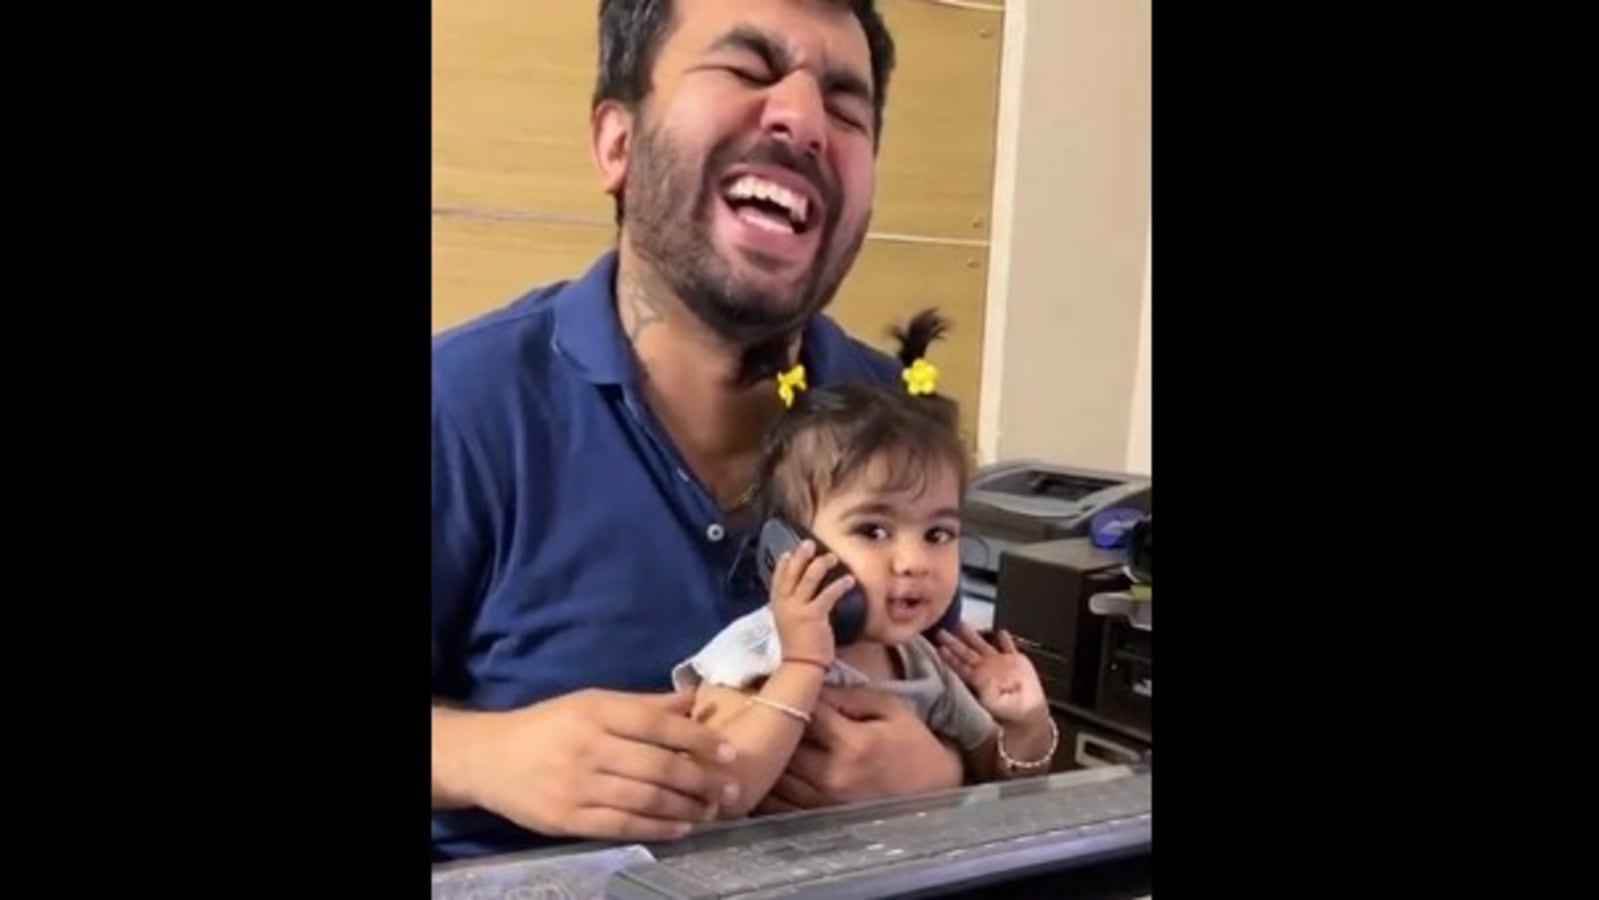 Dad tries teaching baby girl how to hold computer mouse, she thinks it’s a phone | Trending